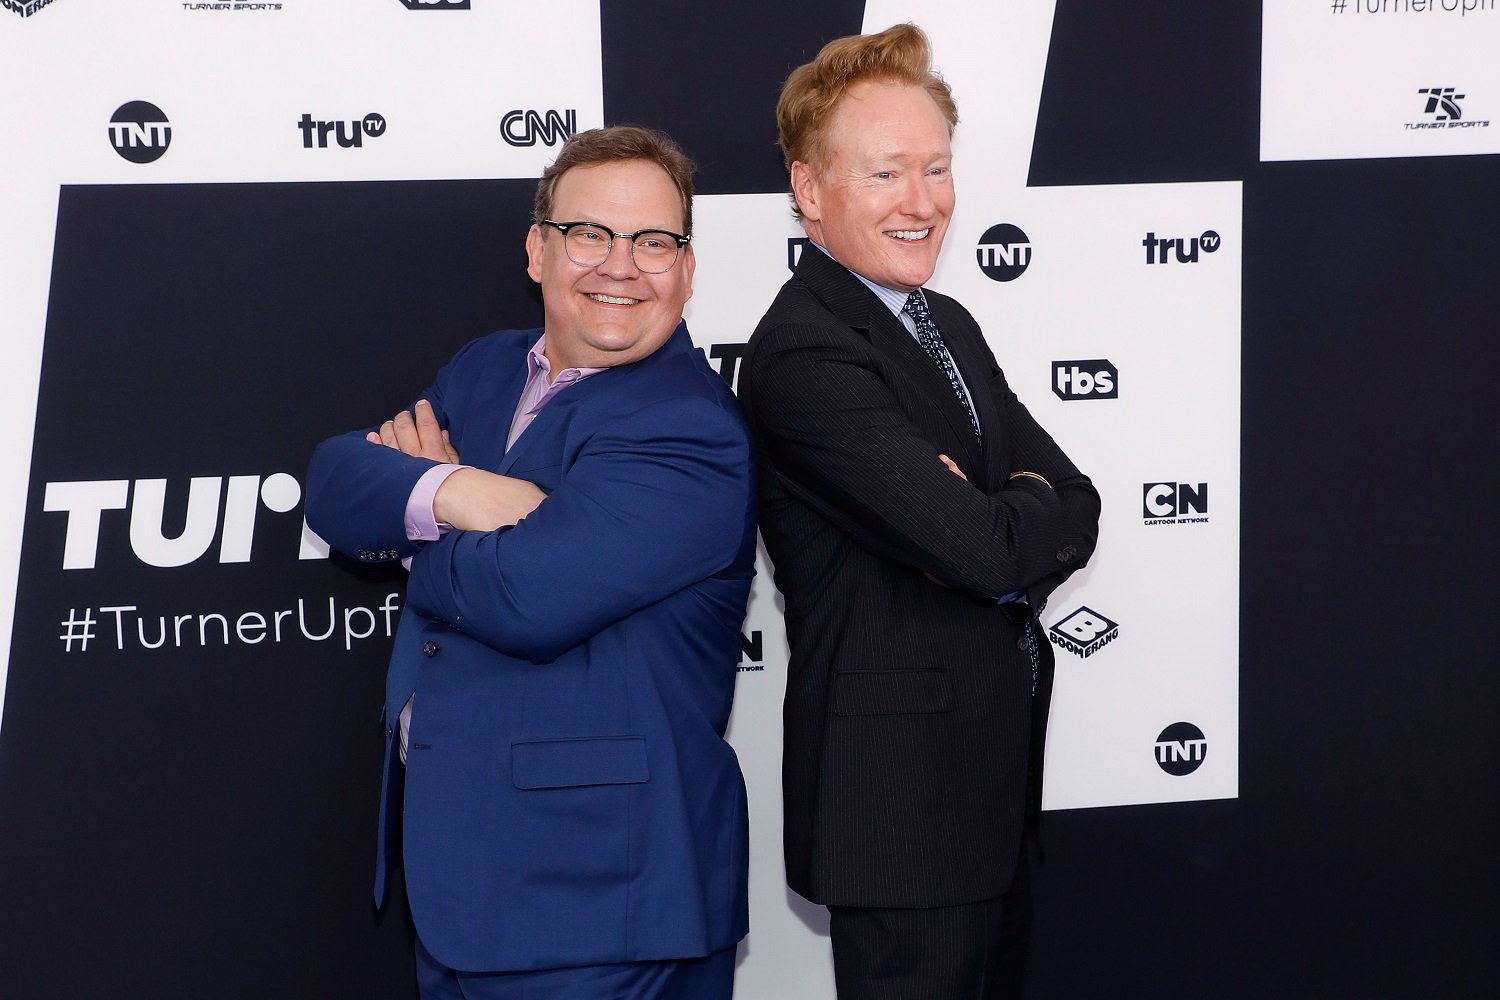 Conan O’Brien Calls Andy Richter ‘One of the Funniest People I Ever Met’